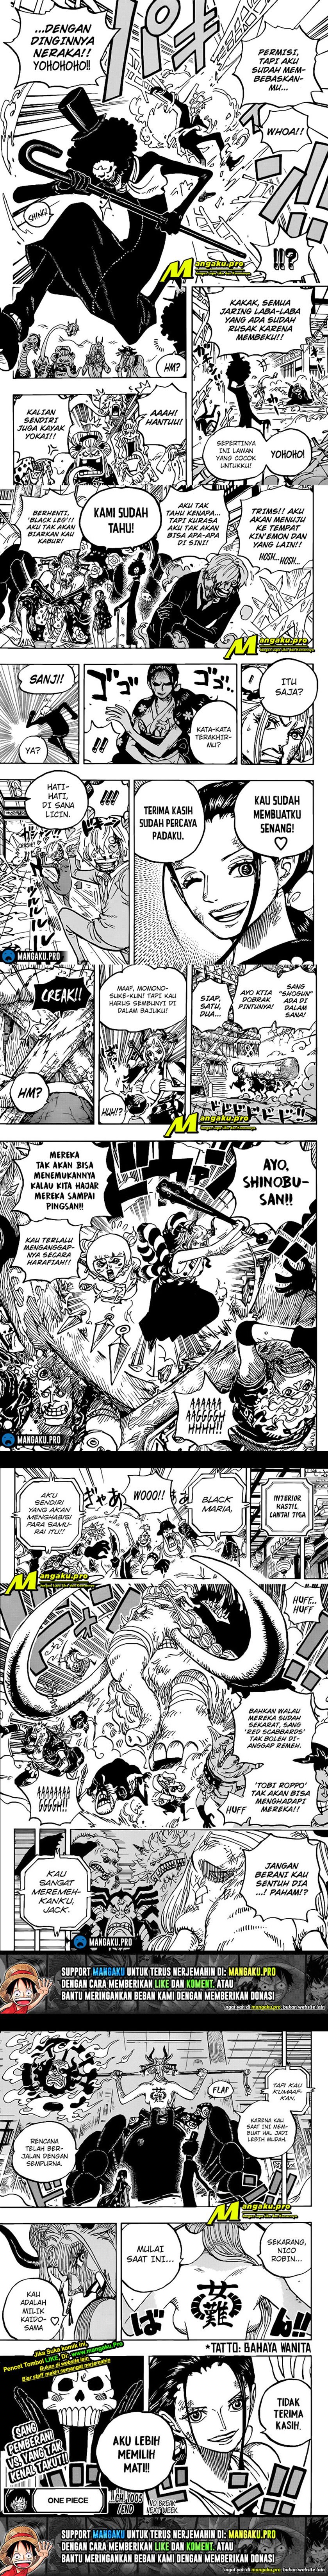 One Piece Chapter 1005 hq Image 4